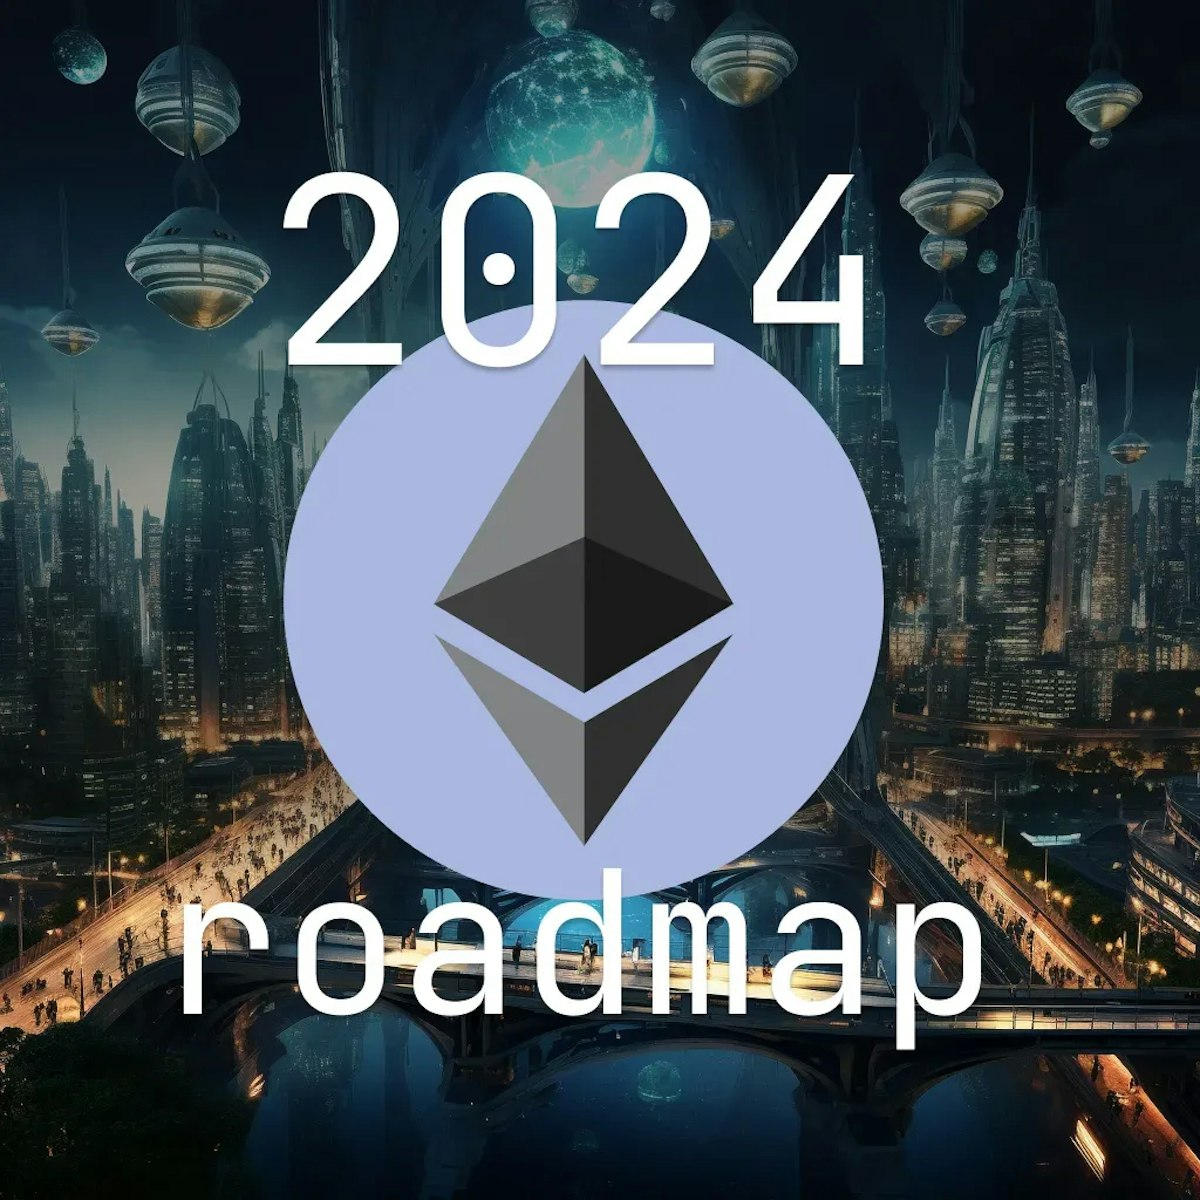 featured image - Ethereum Is Making Itself Future Proof: What to Expect From the Ethereum Roadmap in 2024